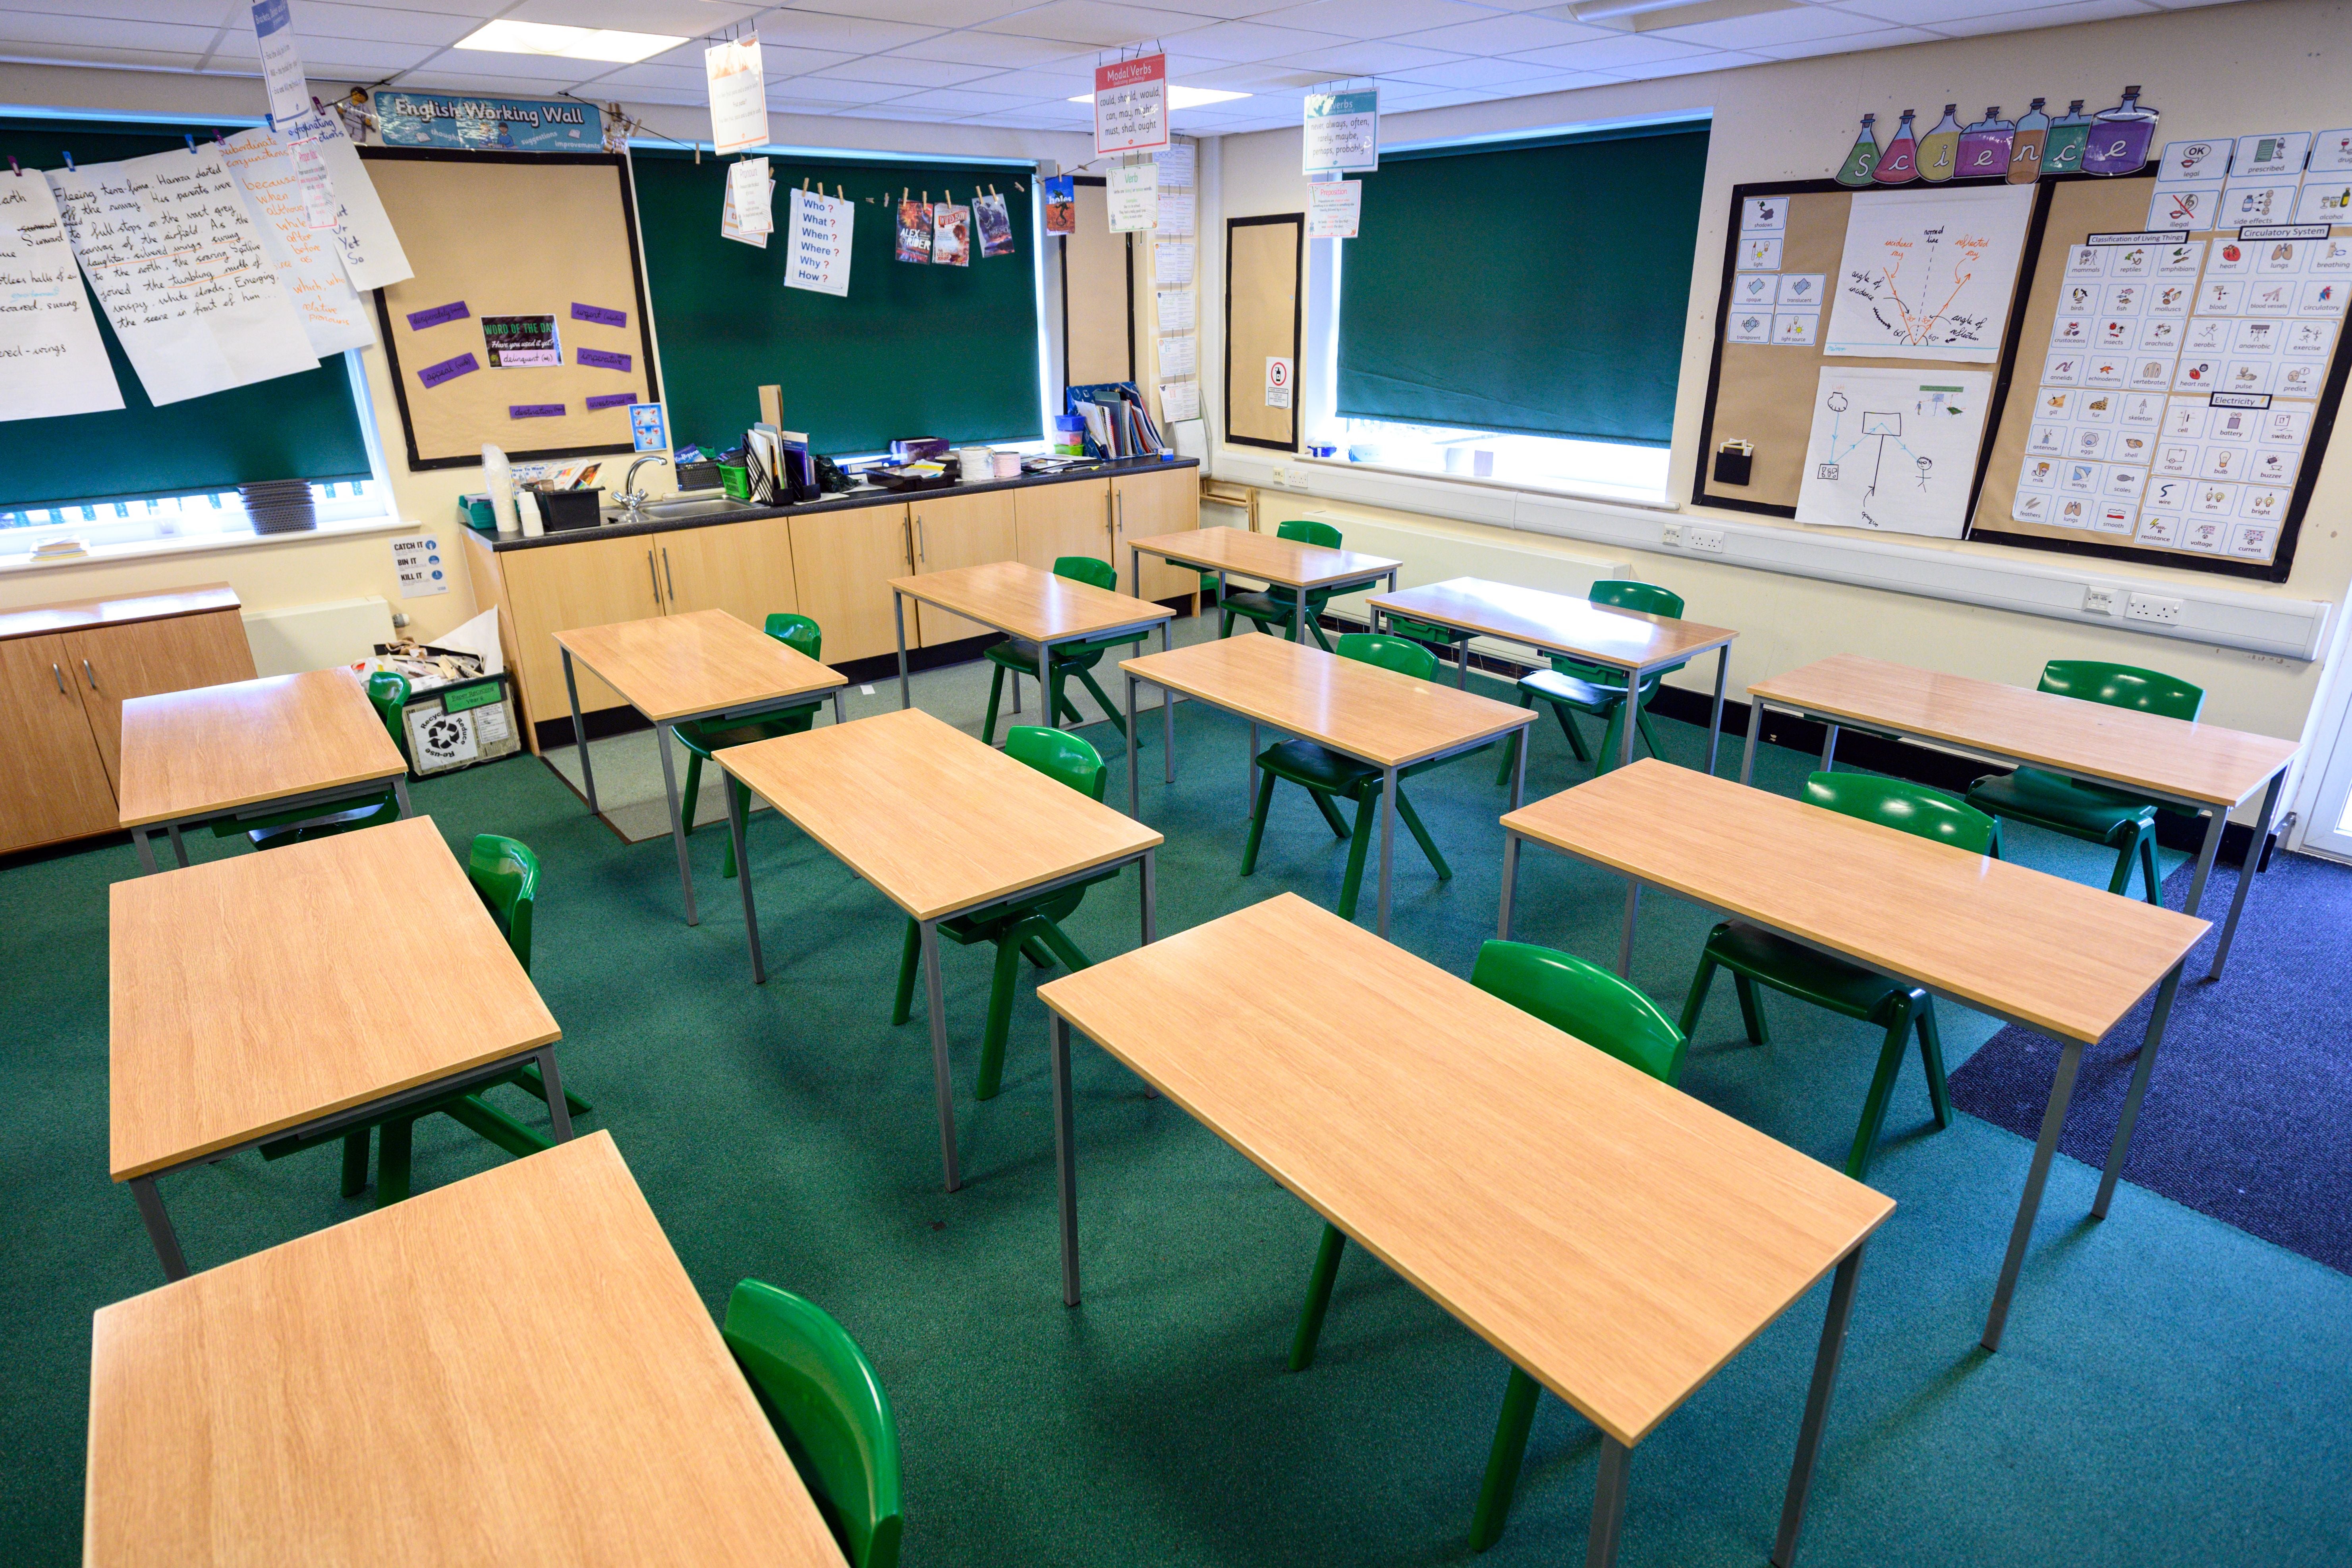 The study collated views from 96 teachers across schools in England